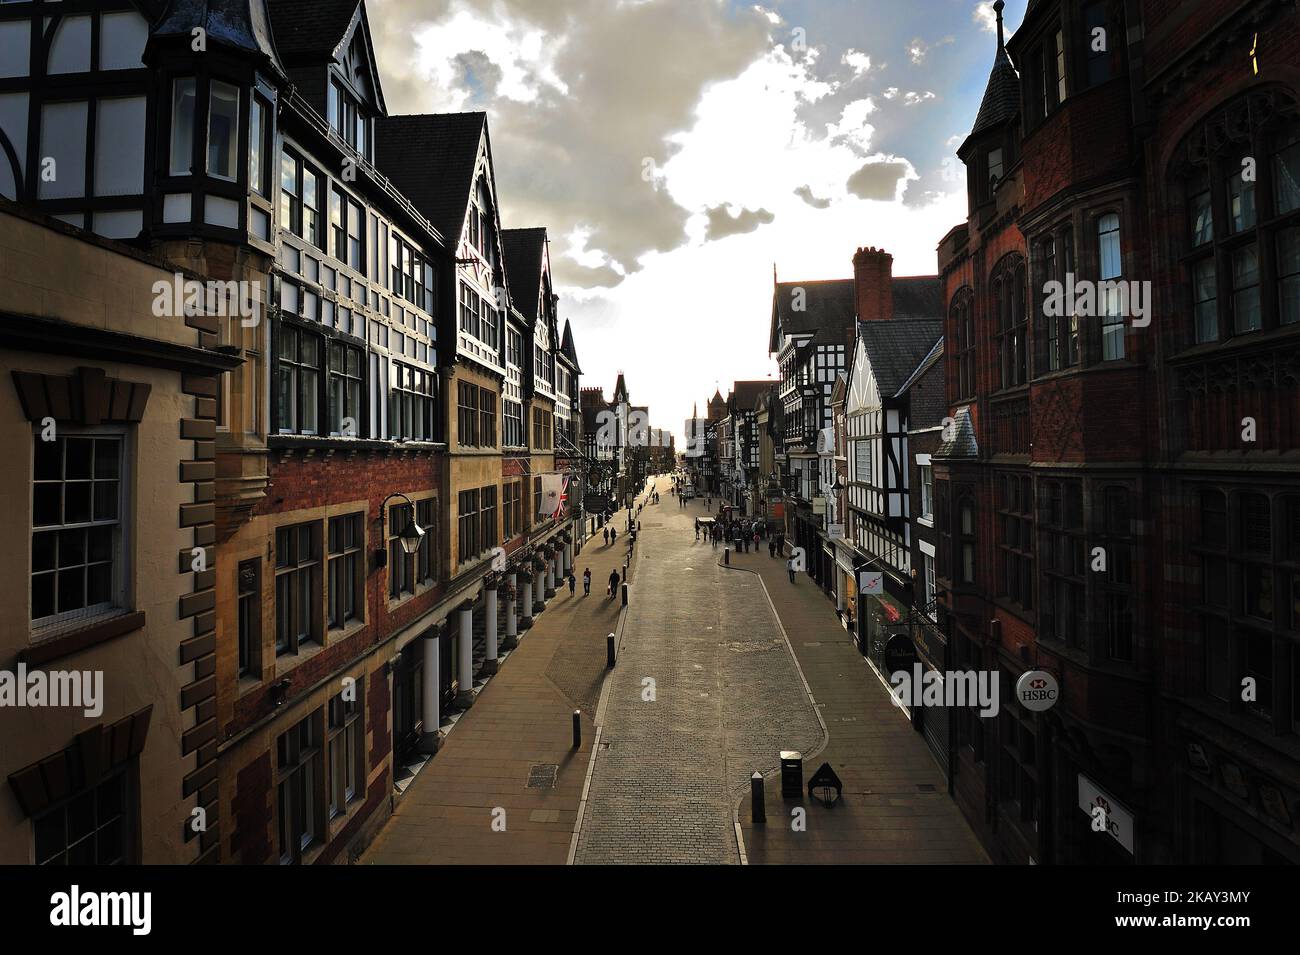 A paved road amid old dense buildings at sunset in the beautiful historic city of Chester, England Stock Photo